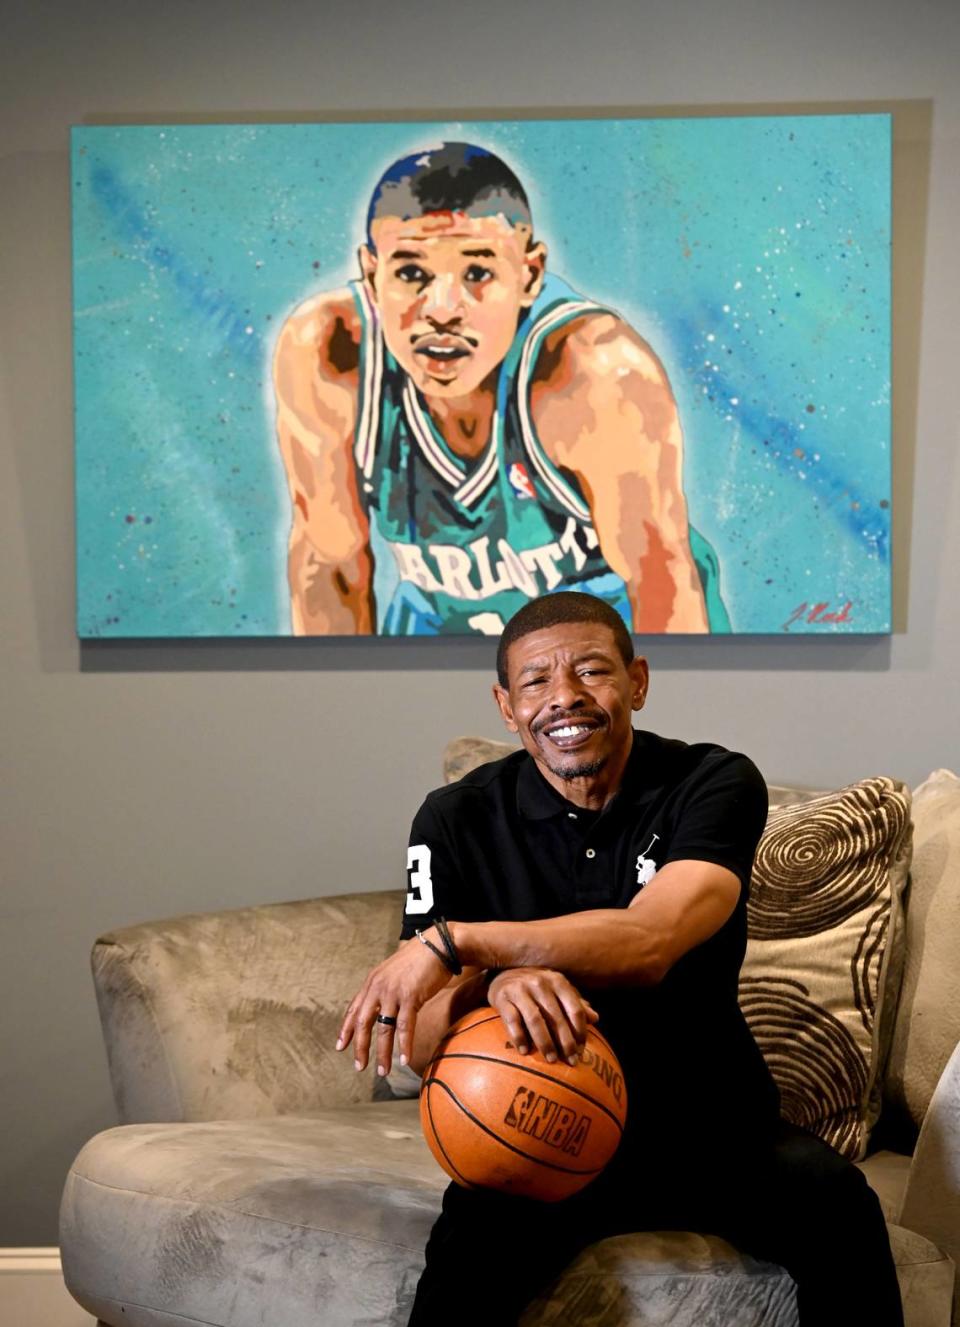 Former Charlotte Hornets guard Muggsy Bogues in 2022. At 5-foot-3, Bogues is the shortest player to ever play in the NBA having played point guard for the then Washington Bullets (Wizards), Charlotte Hornets, Golden State Warriors and Toronto Raptors. He still is the Hornets’ all-time leader in steals and assists.